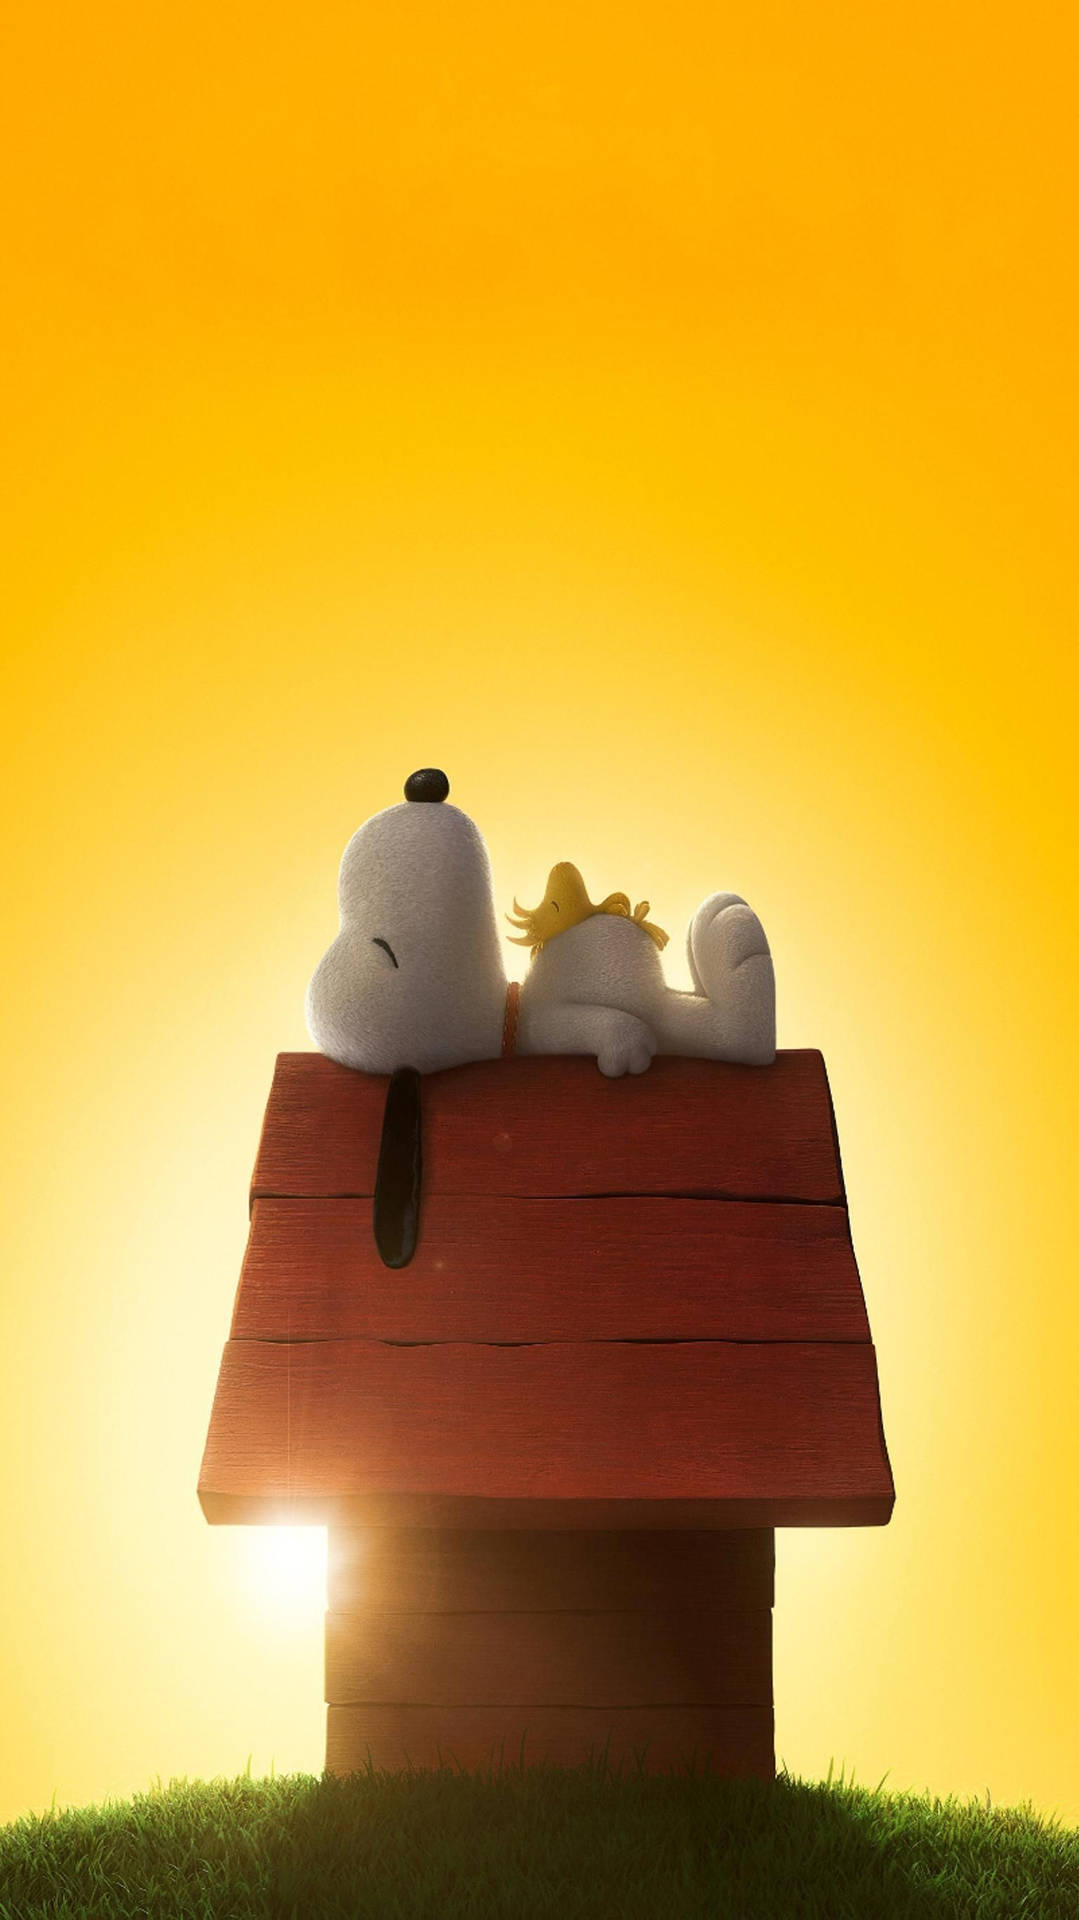 The Peanuts Movie Snoopy During Sunset Wallpaper